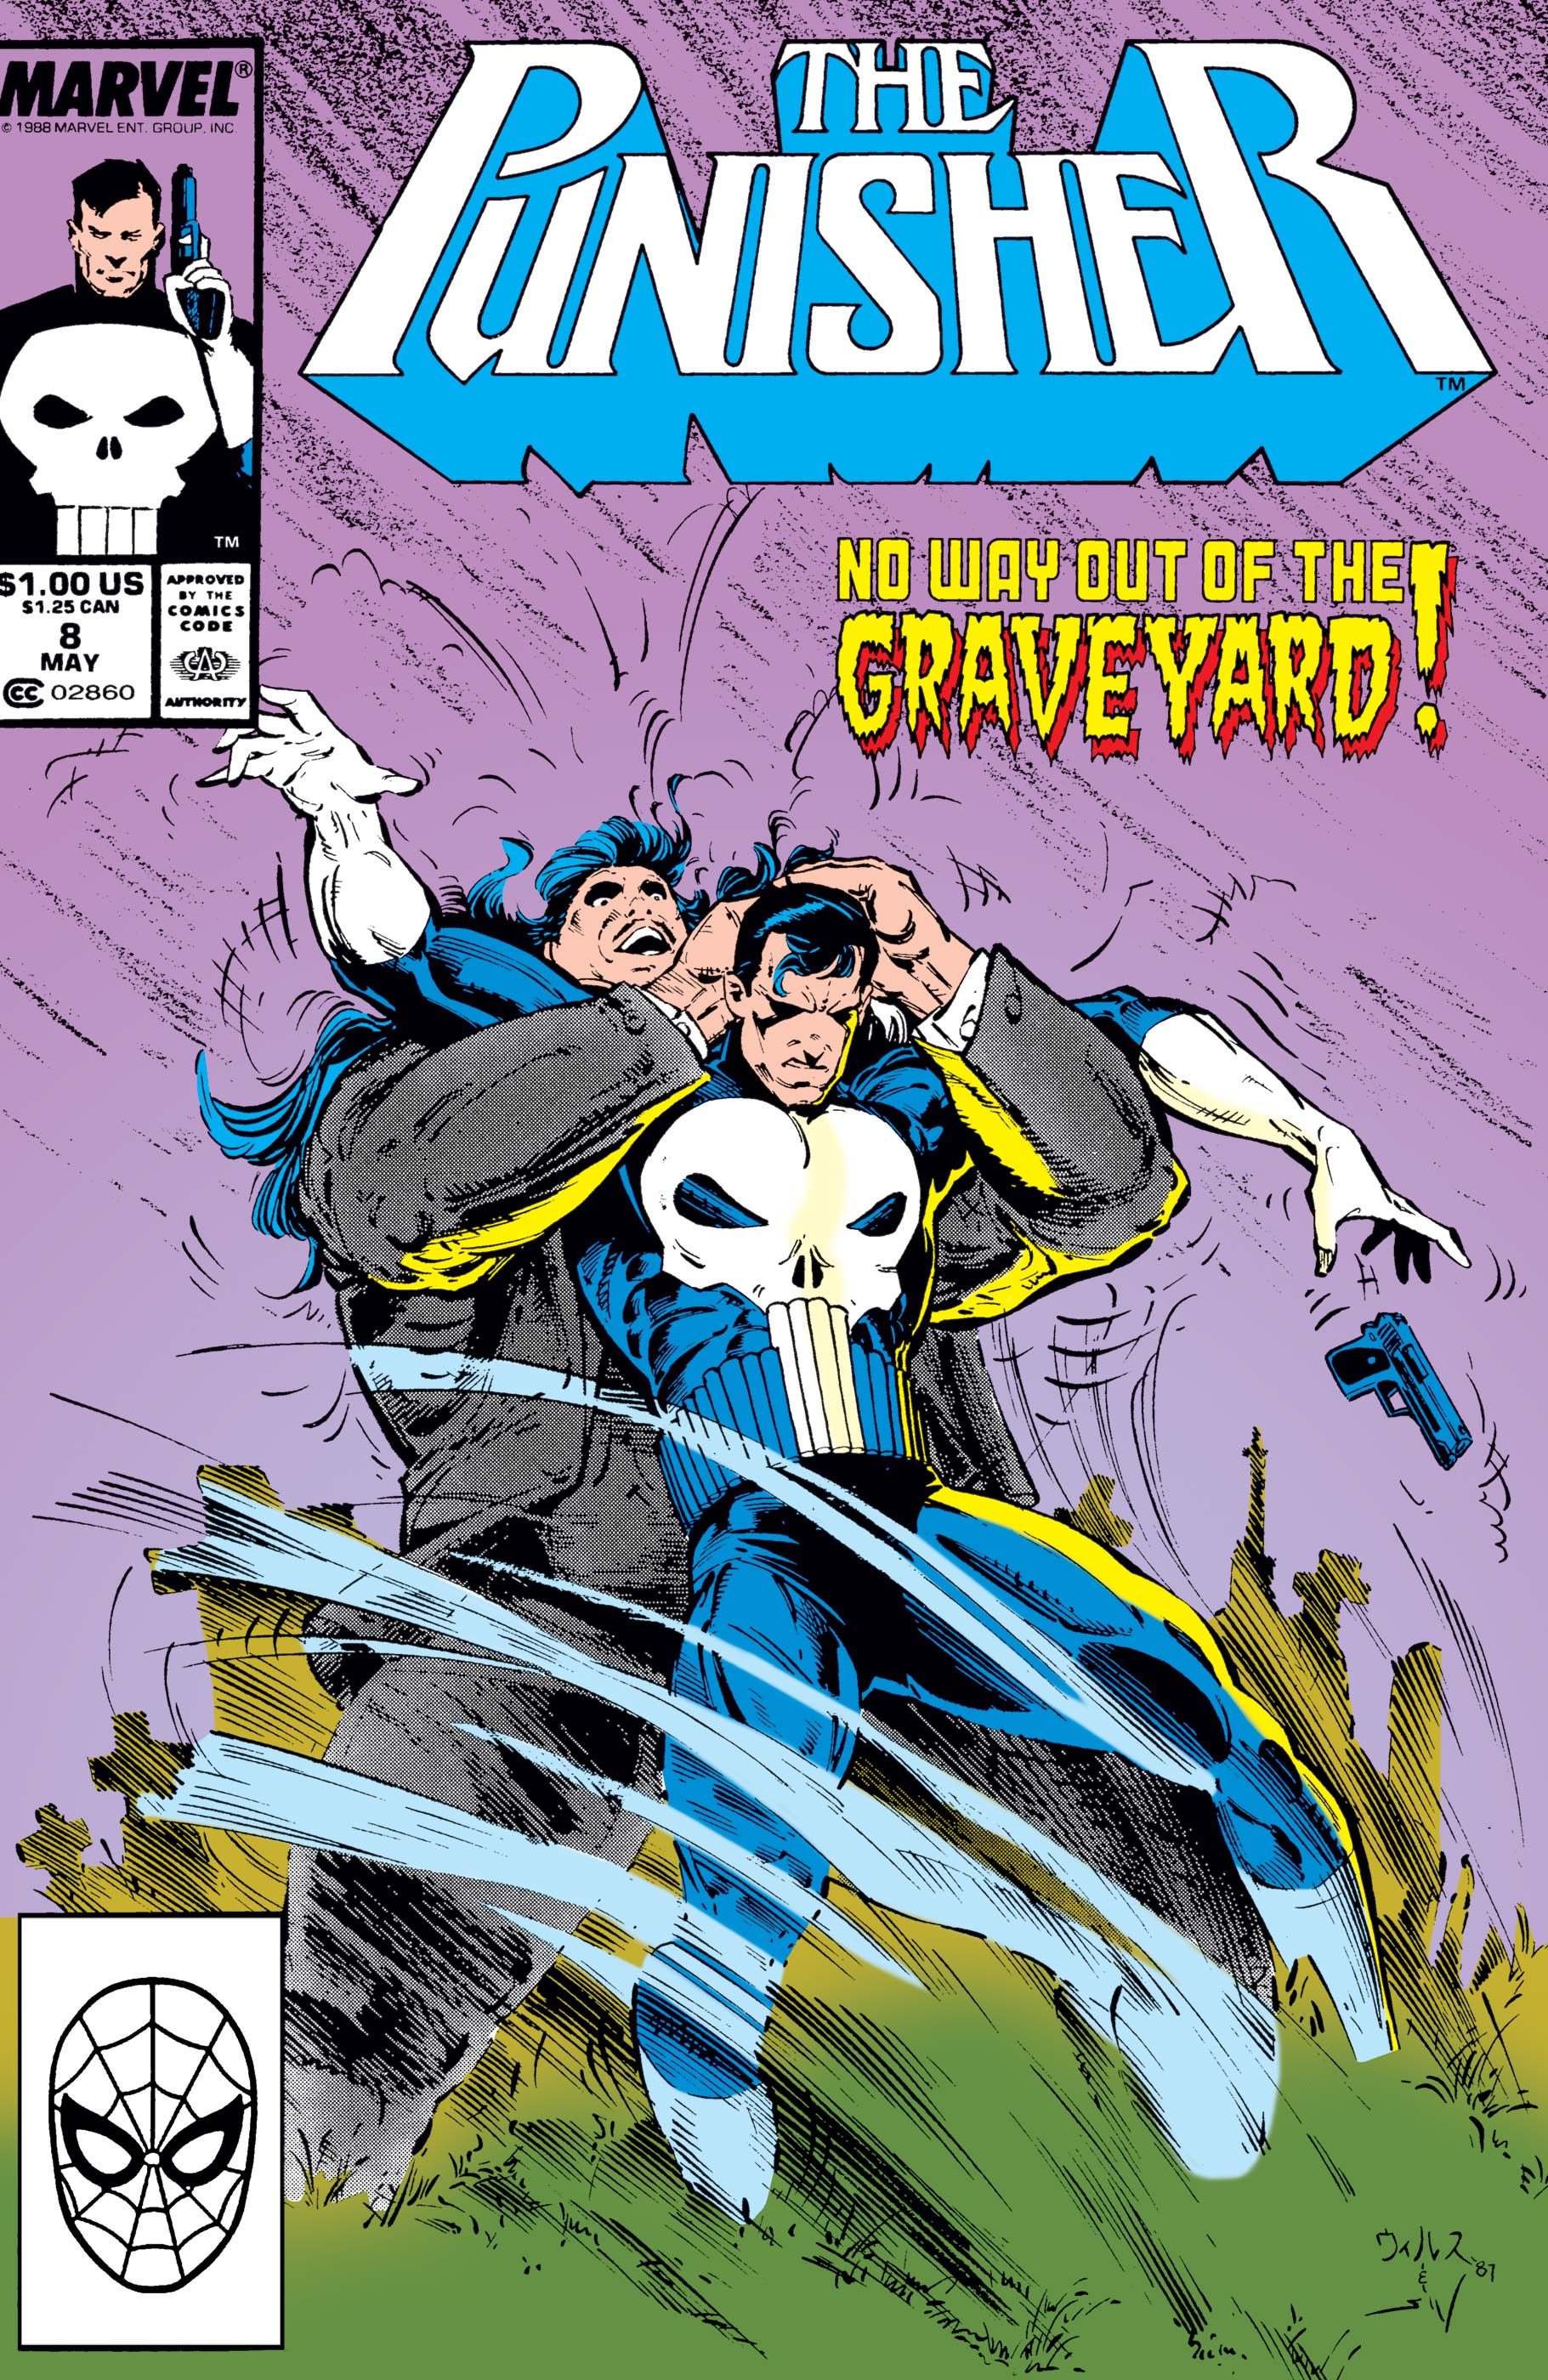 The Punisher (1987) #8